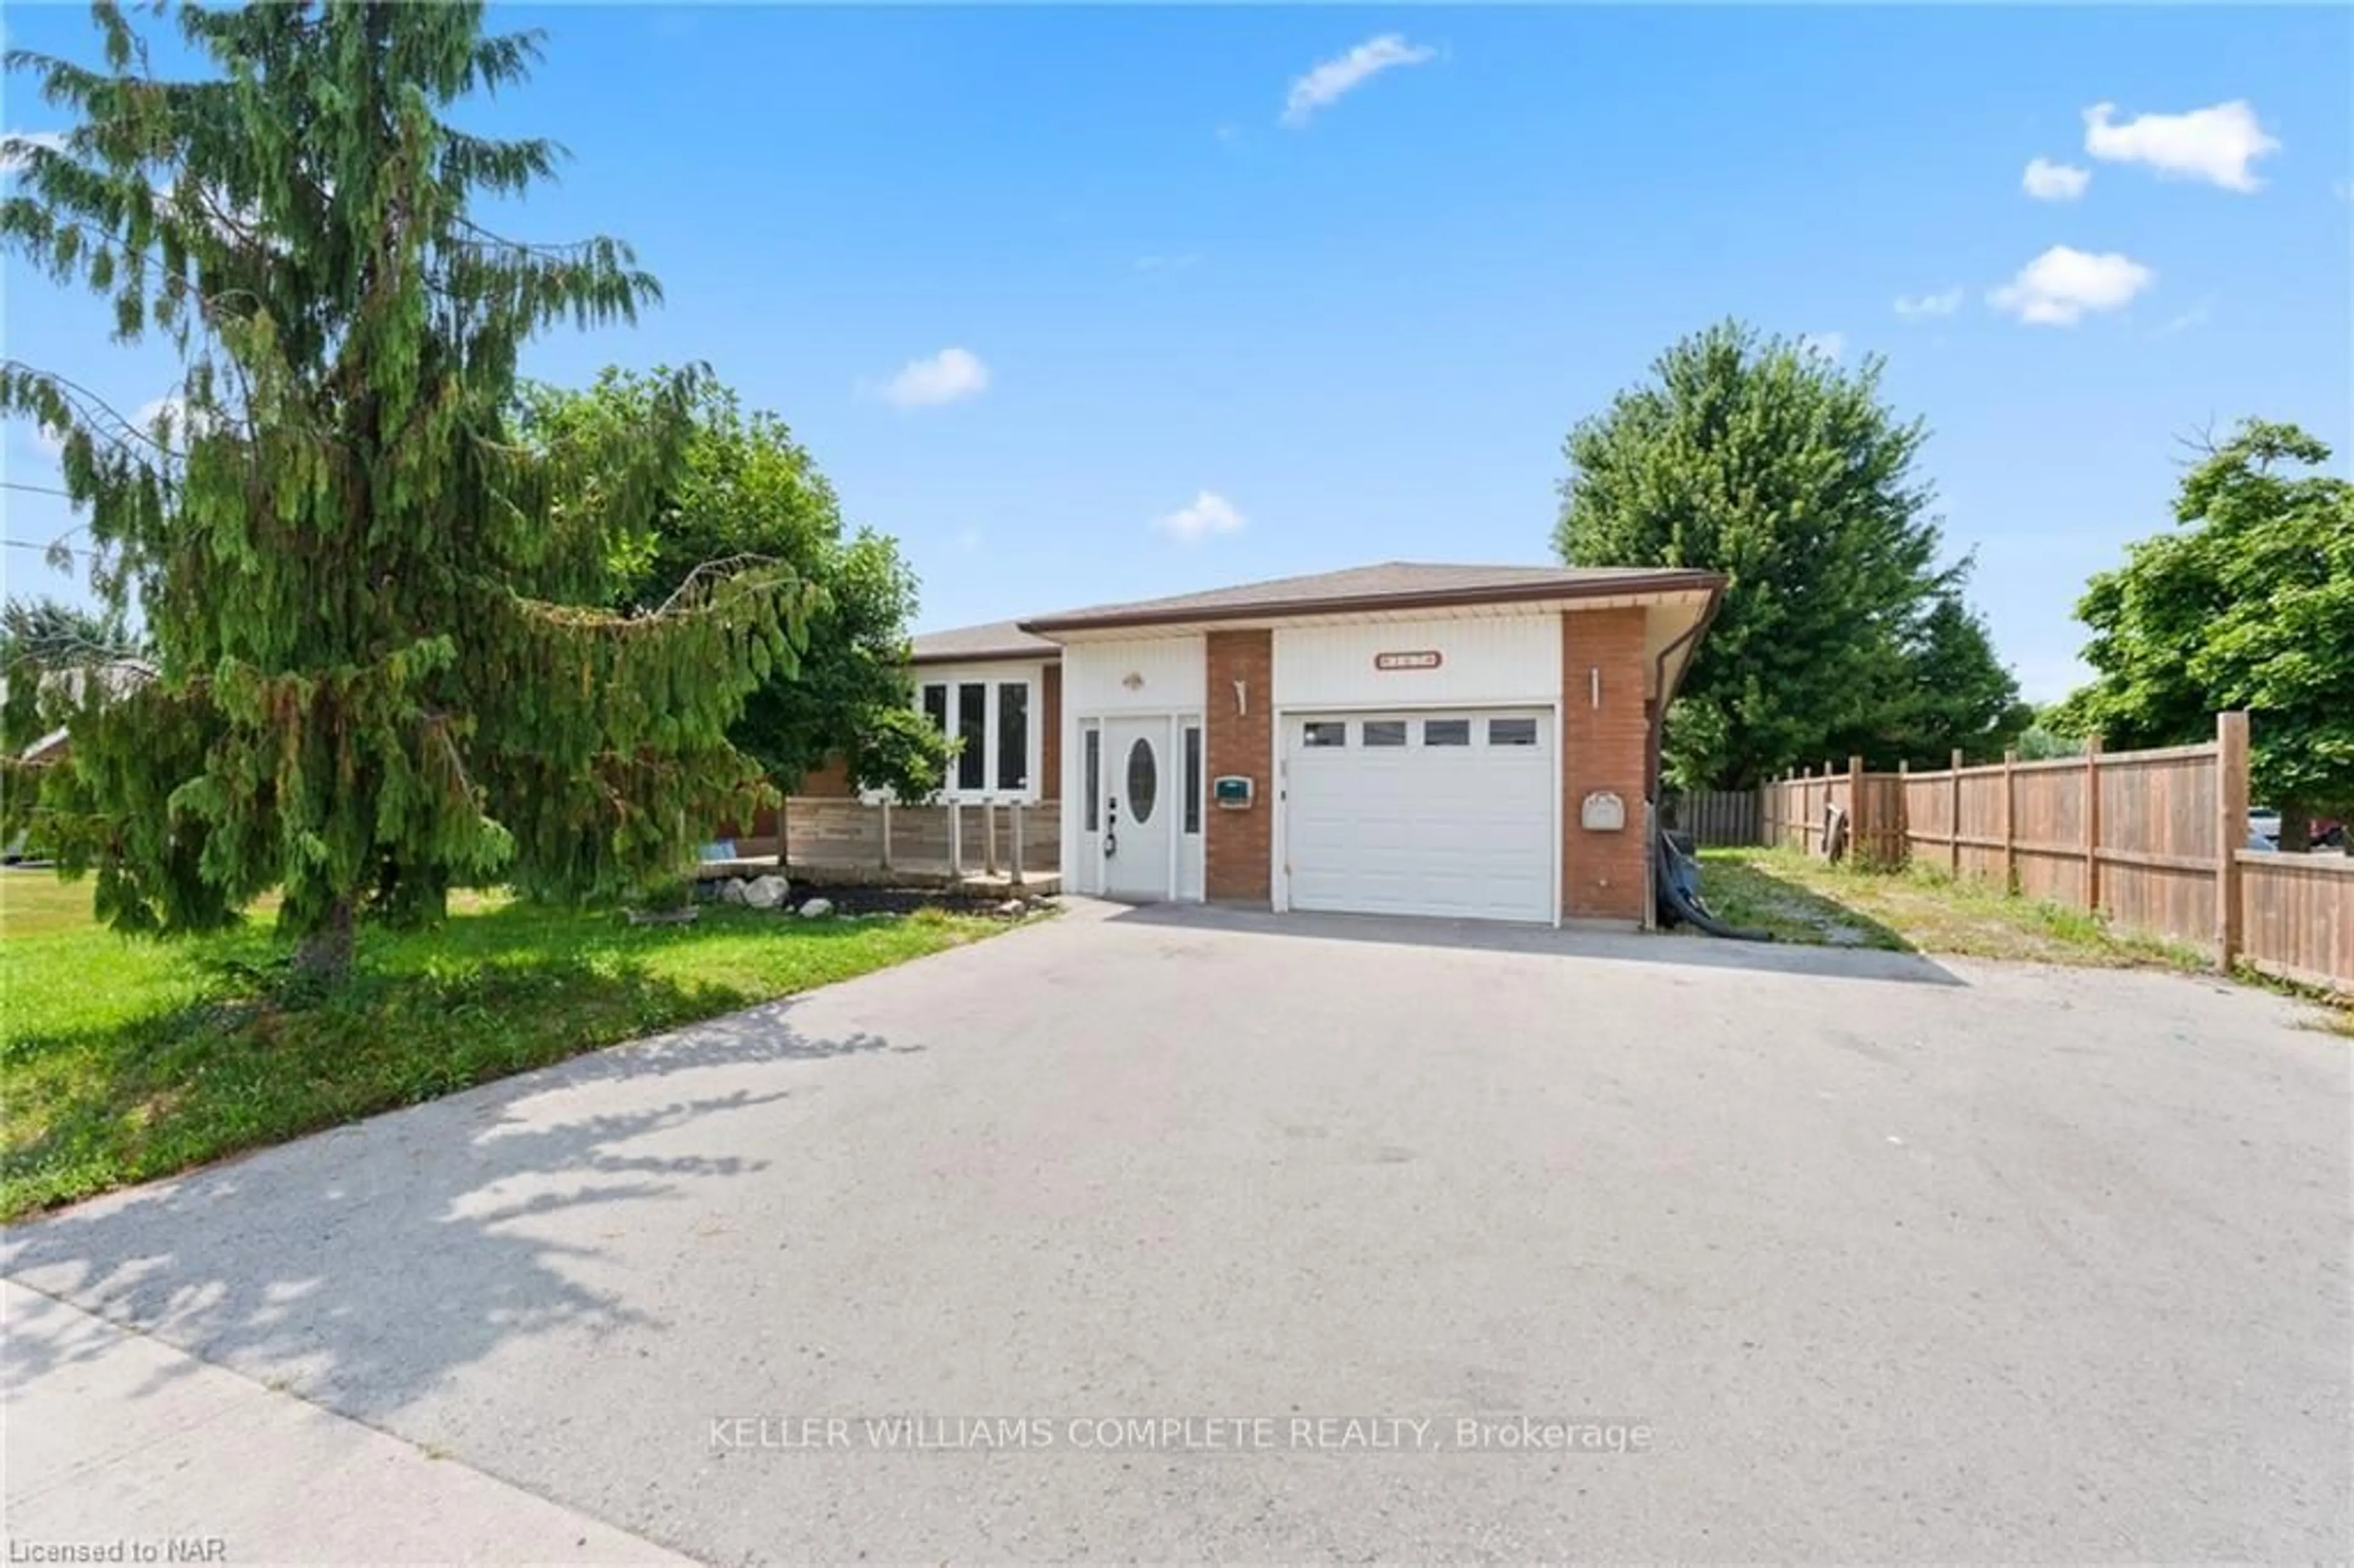 Frontside or backside of a home for 167 Wellington St, Welland Ontario L3B 3N2